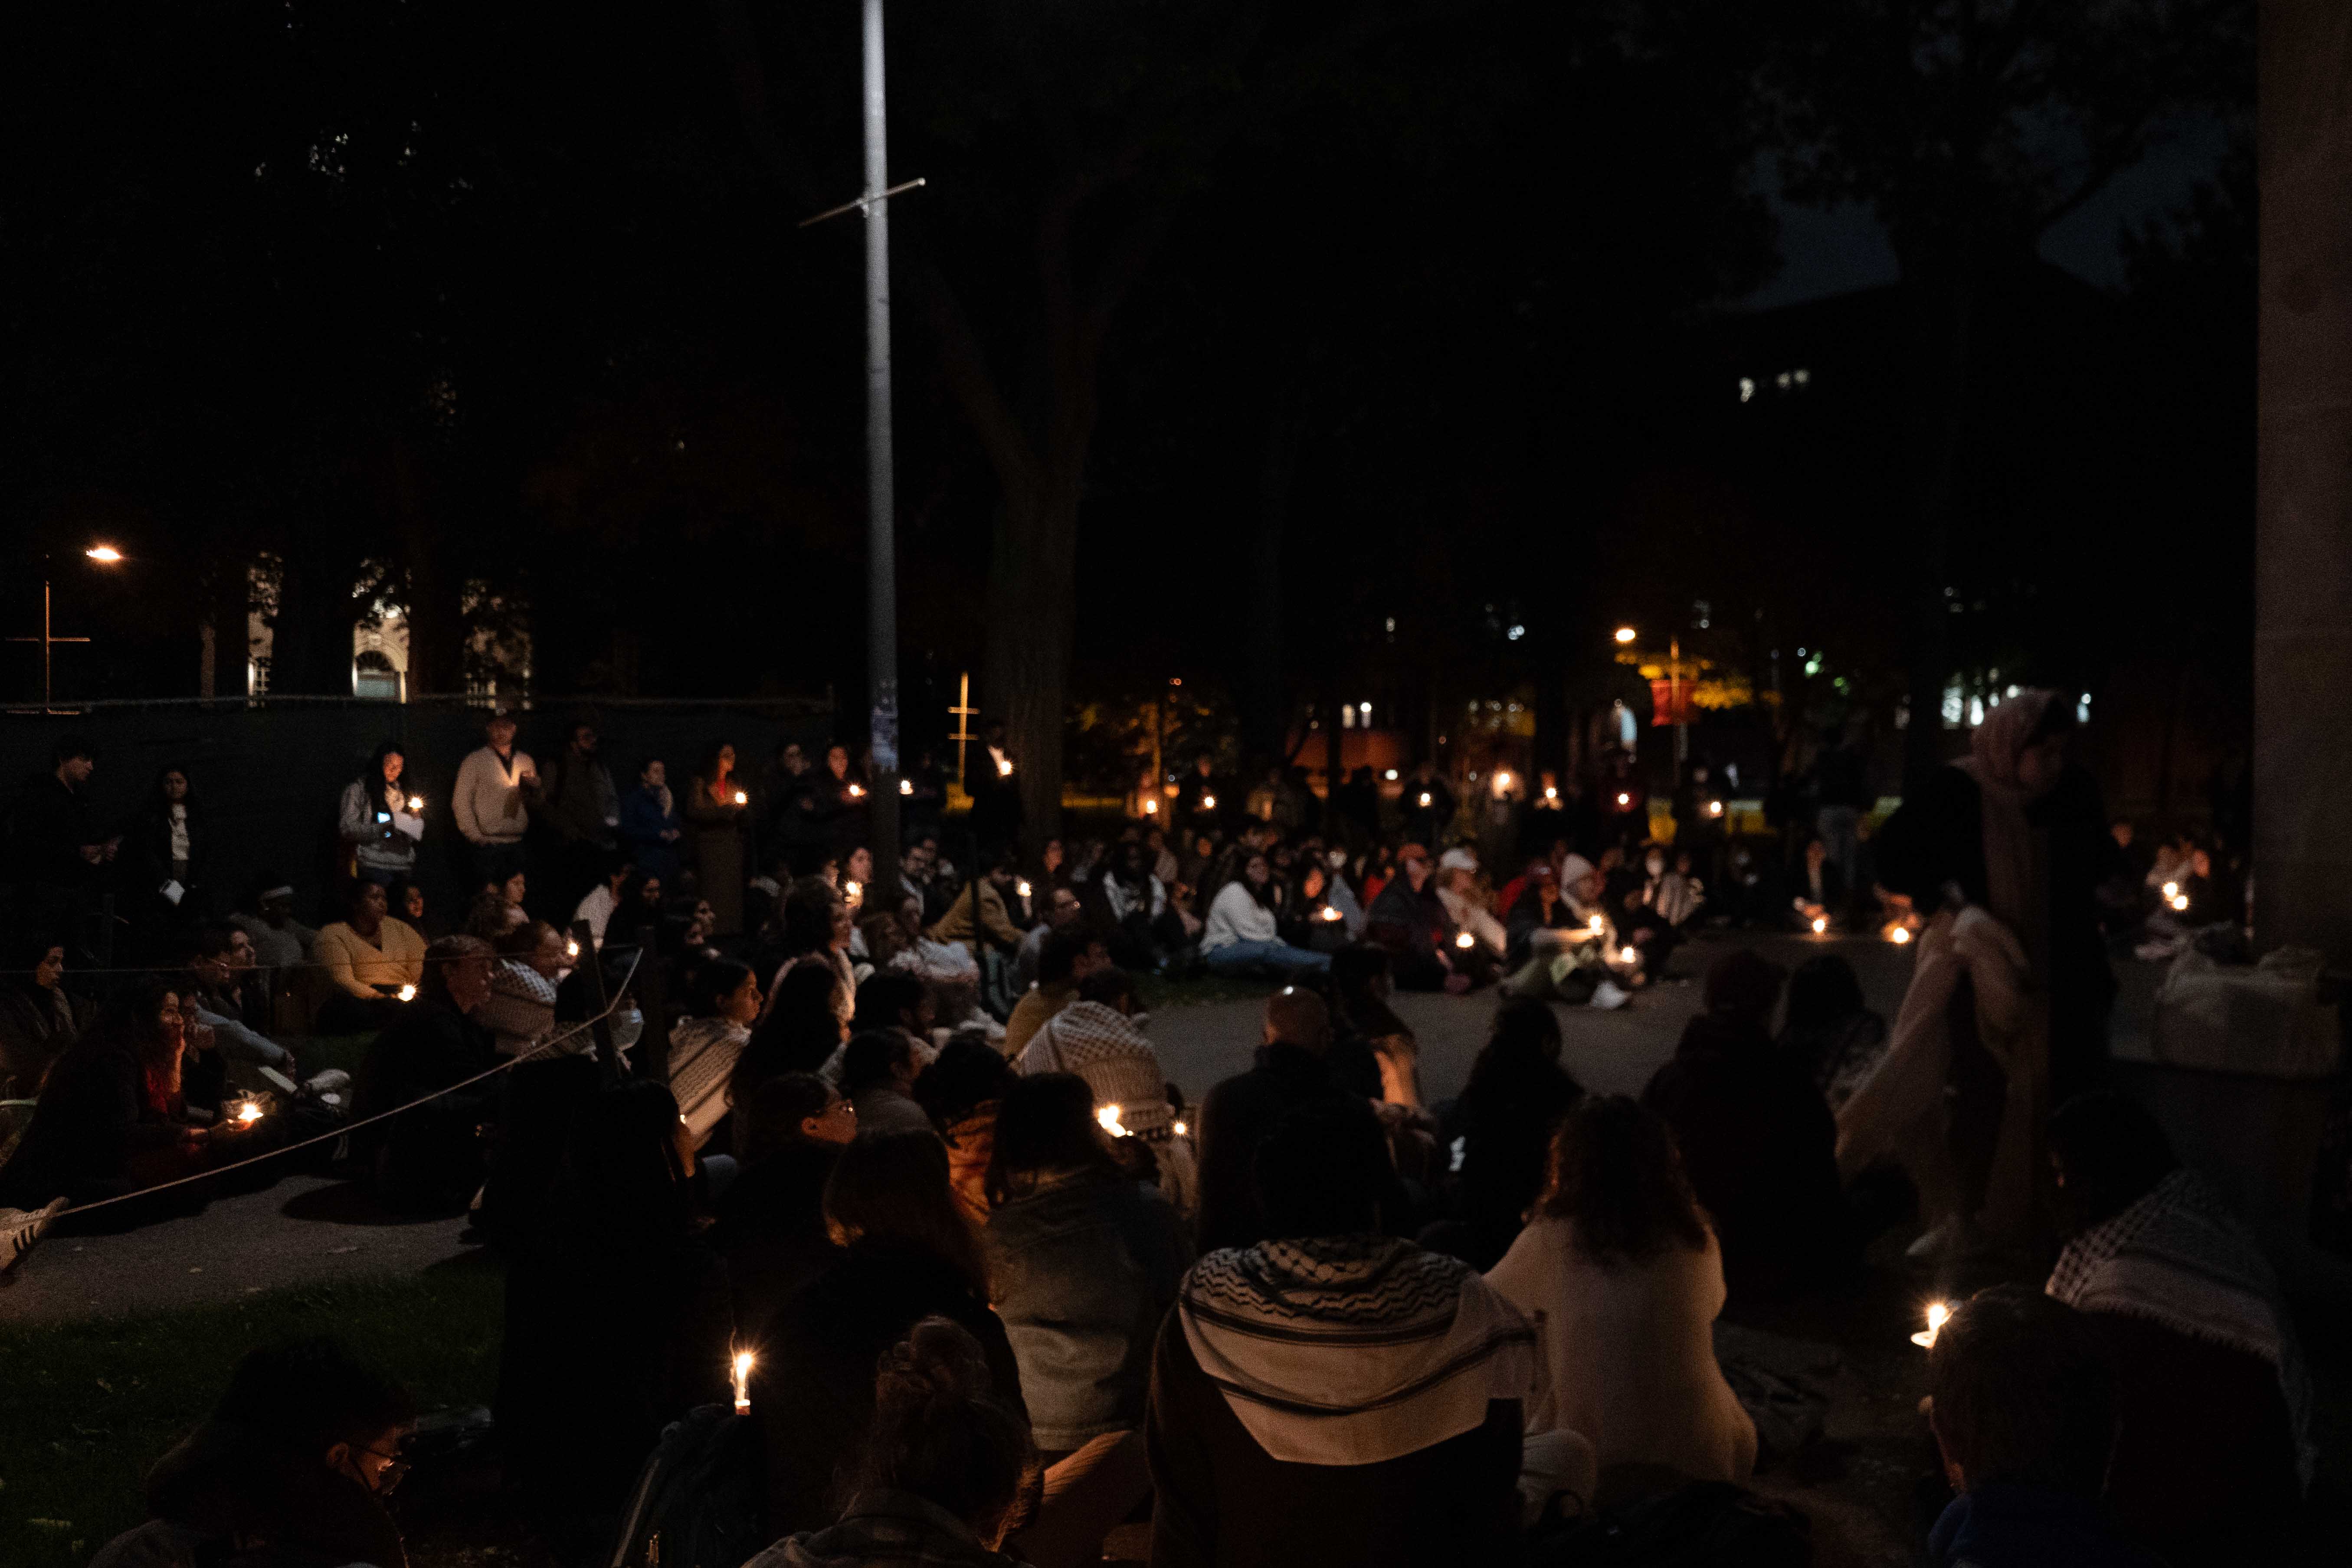 More than 150 Harvard affiliates mourn the deaths of Palestinian children in a vigil by the steps of Widener Library organized by the Harvard Undergraduate Palestine Solidarity Committee and Graduate Students 4 Palestine.